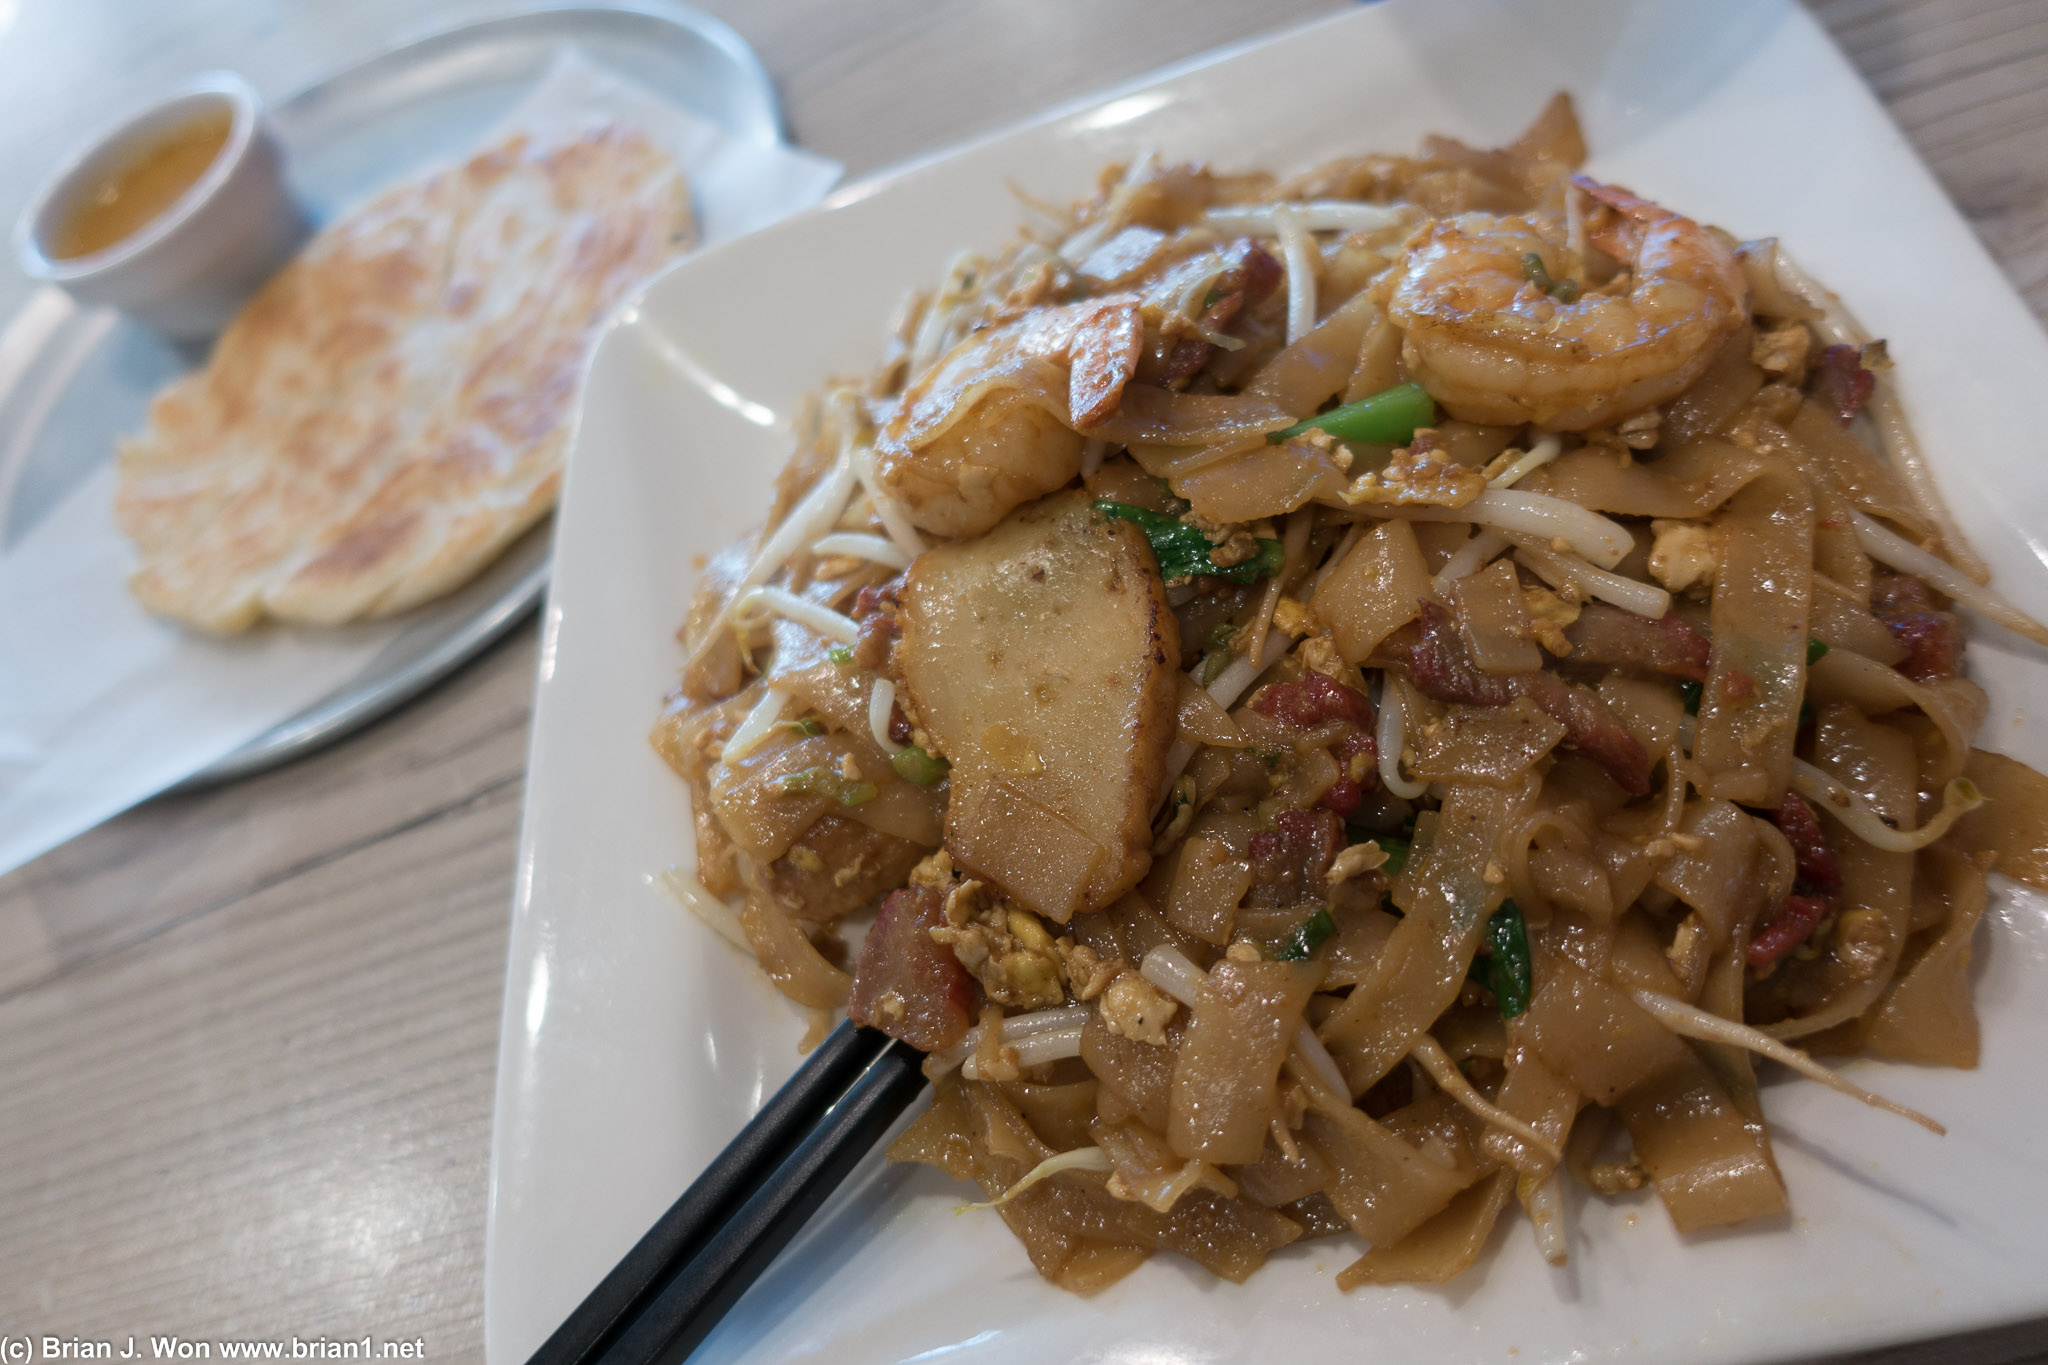 Char kway teow. Doesn't compete with Singapore, but for LA it's not bad.